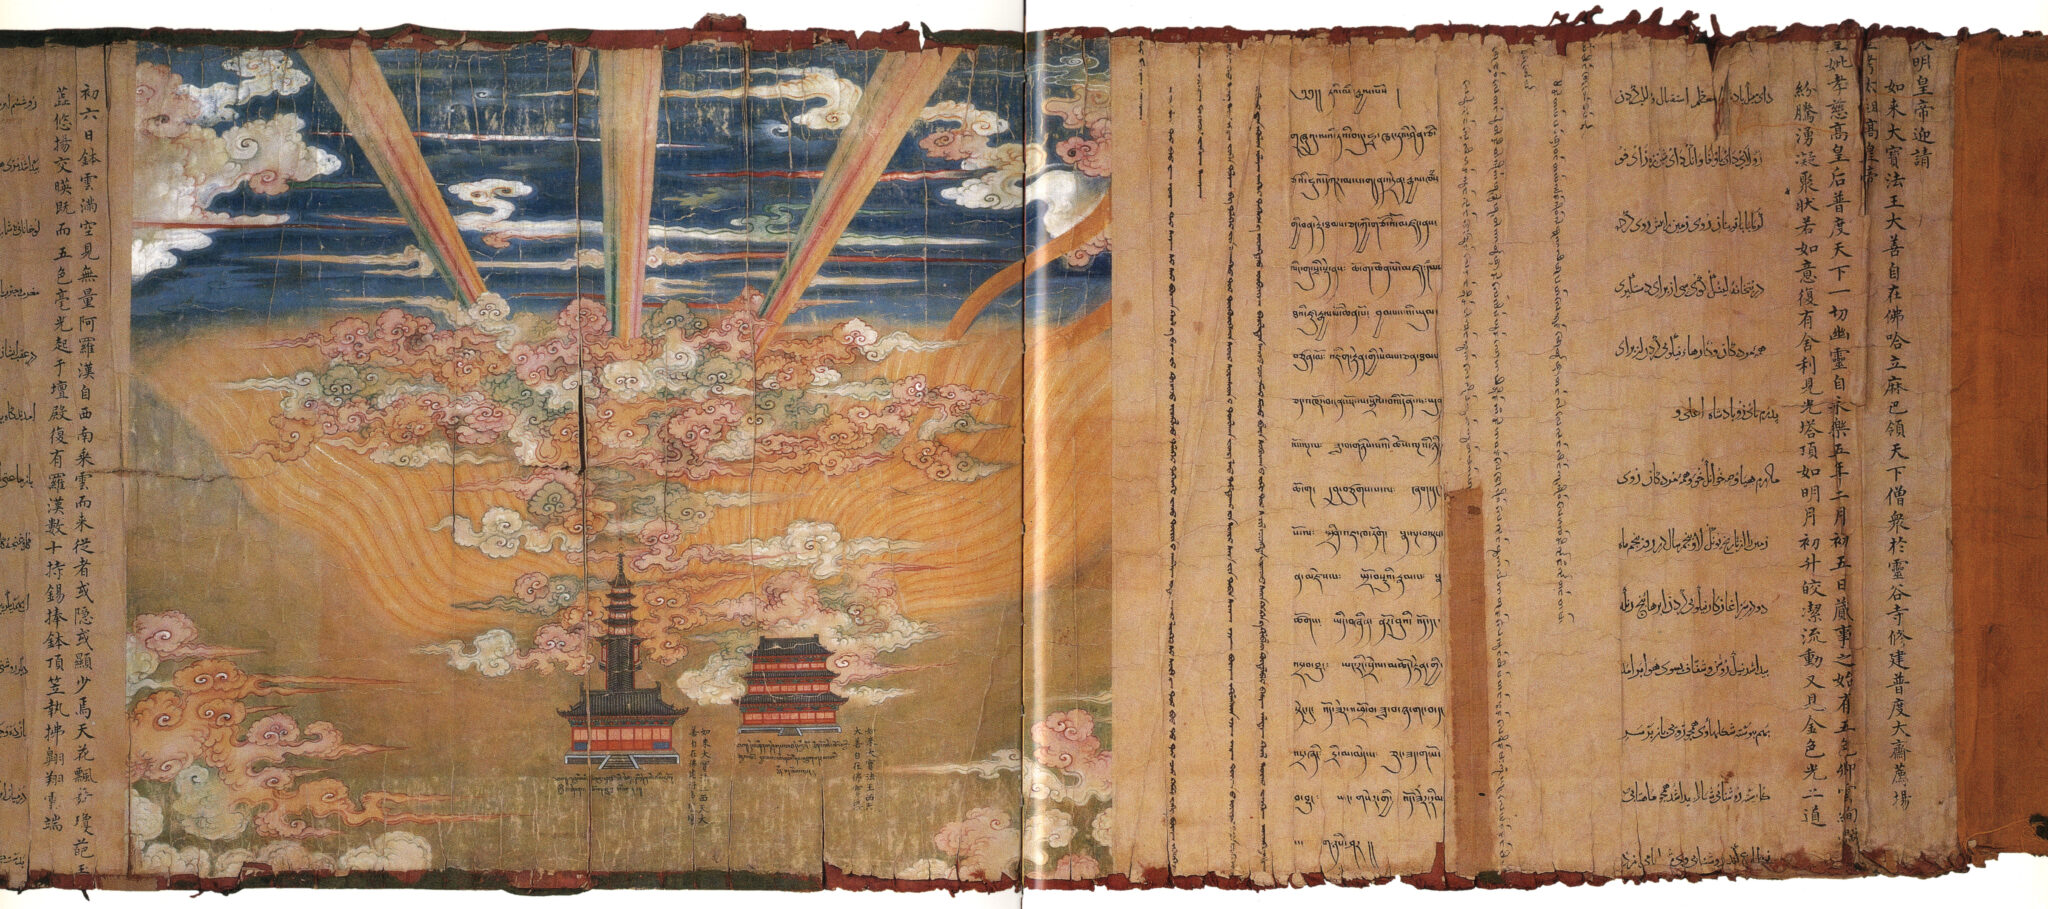 Manuscript featuring landscape with stupas, pagodas and clouds at left, text in different languages at right